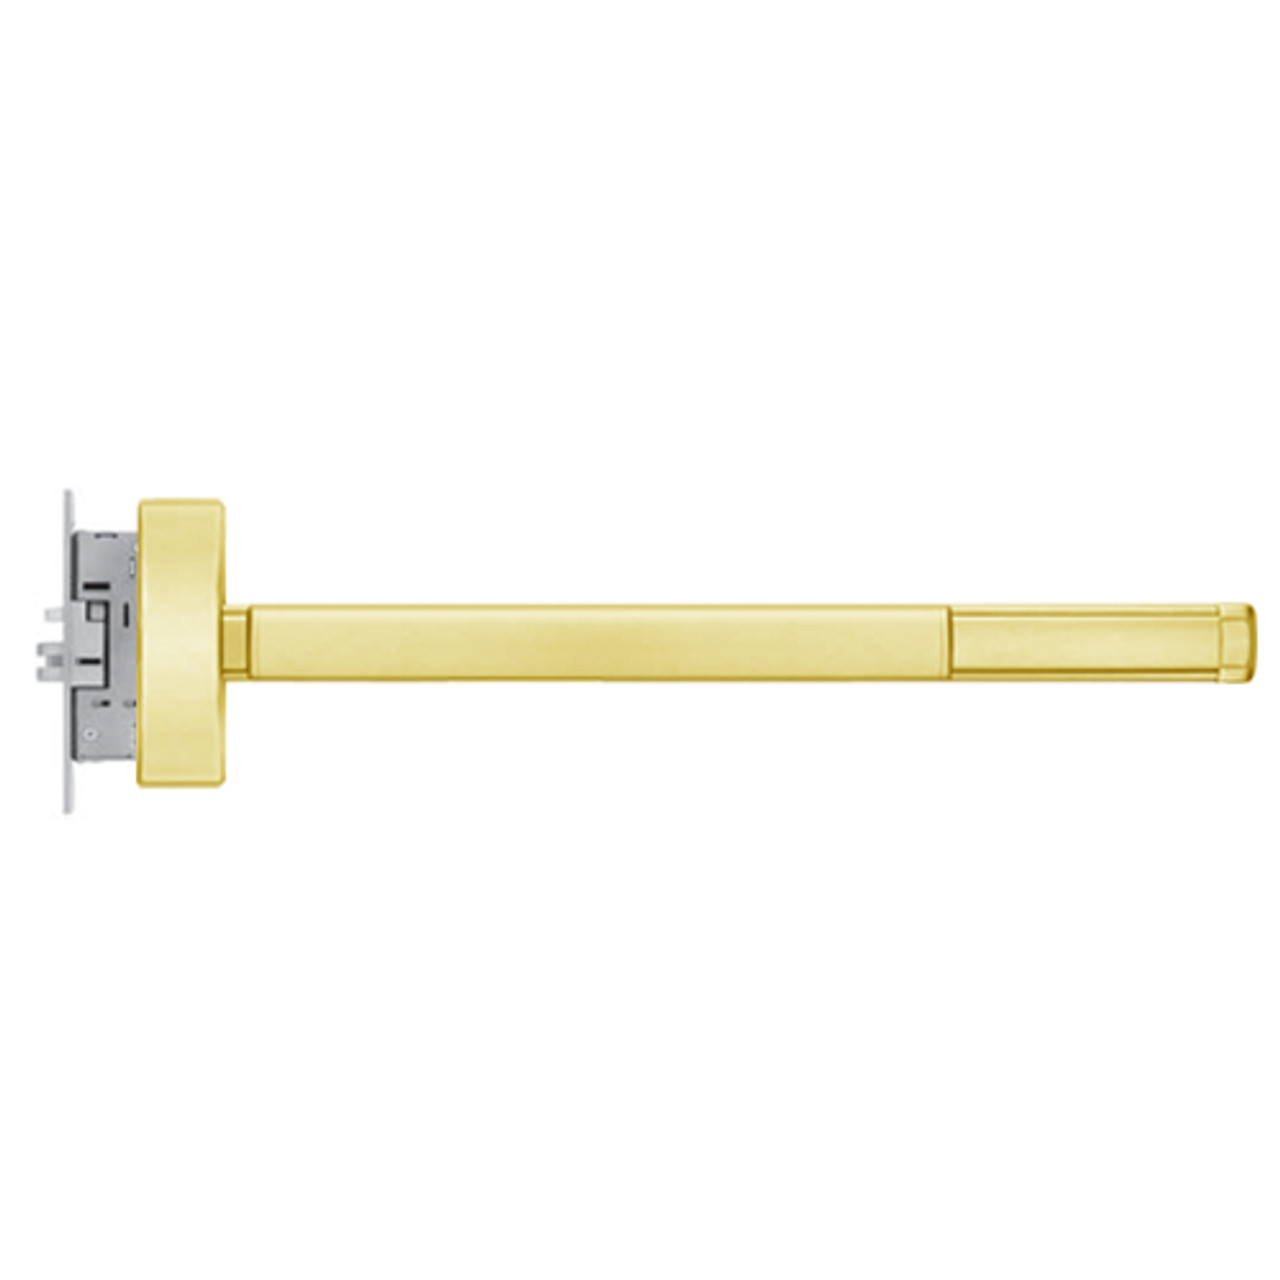 2308-LHR-605-48 PHI 2300 Series Non Fire Rated Apex Mortise Exit Device Prepped for Key Controls Lever/Knob in Bright Brass Finish